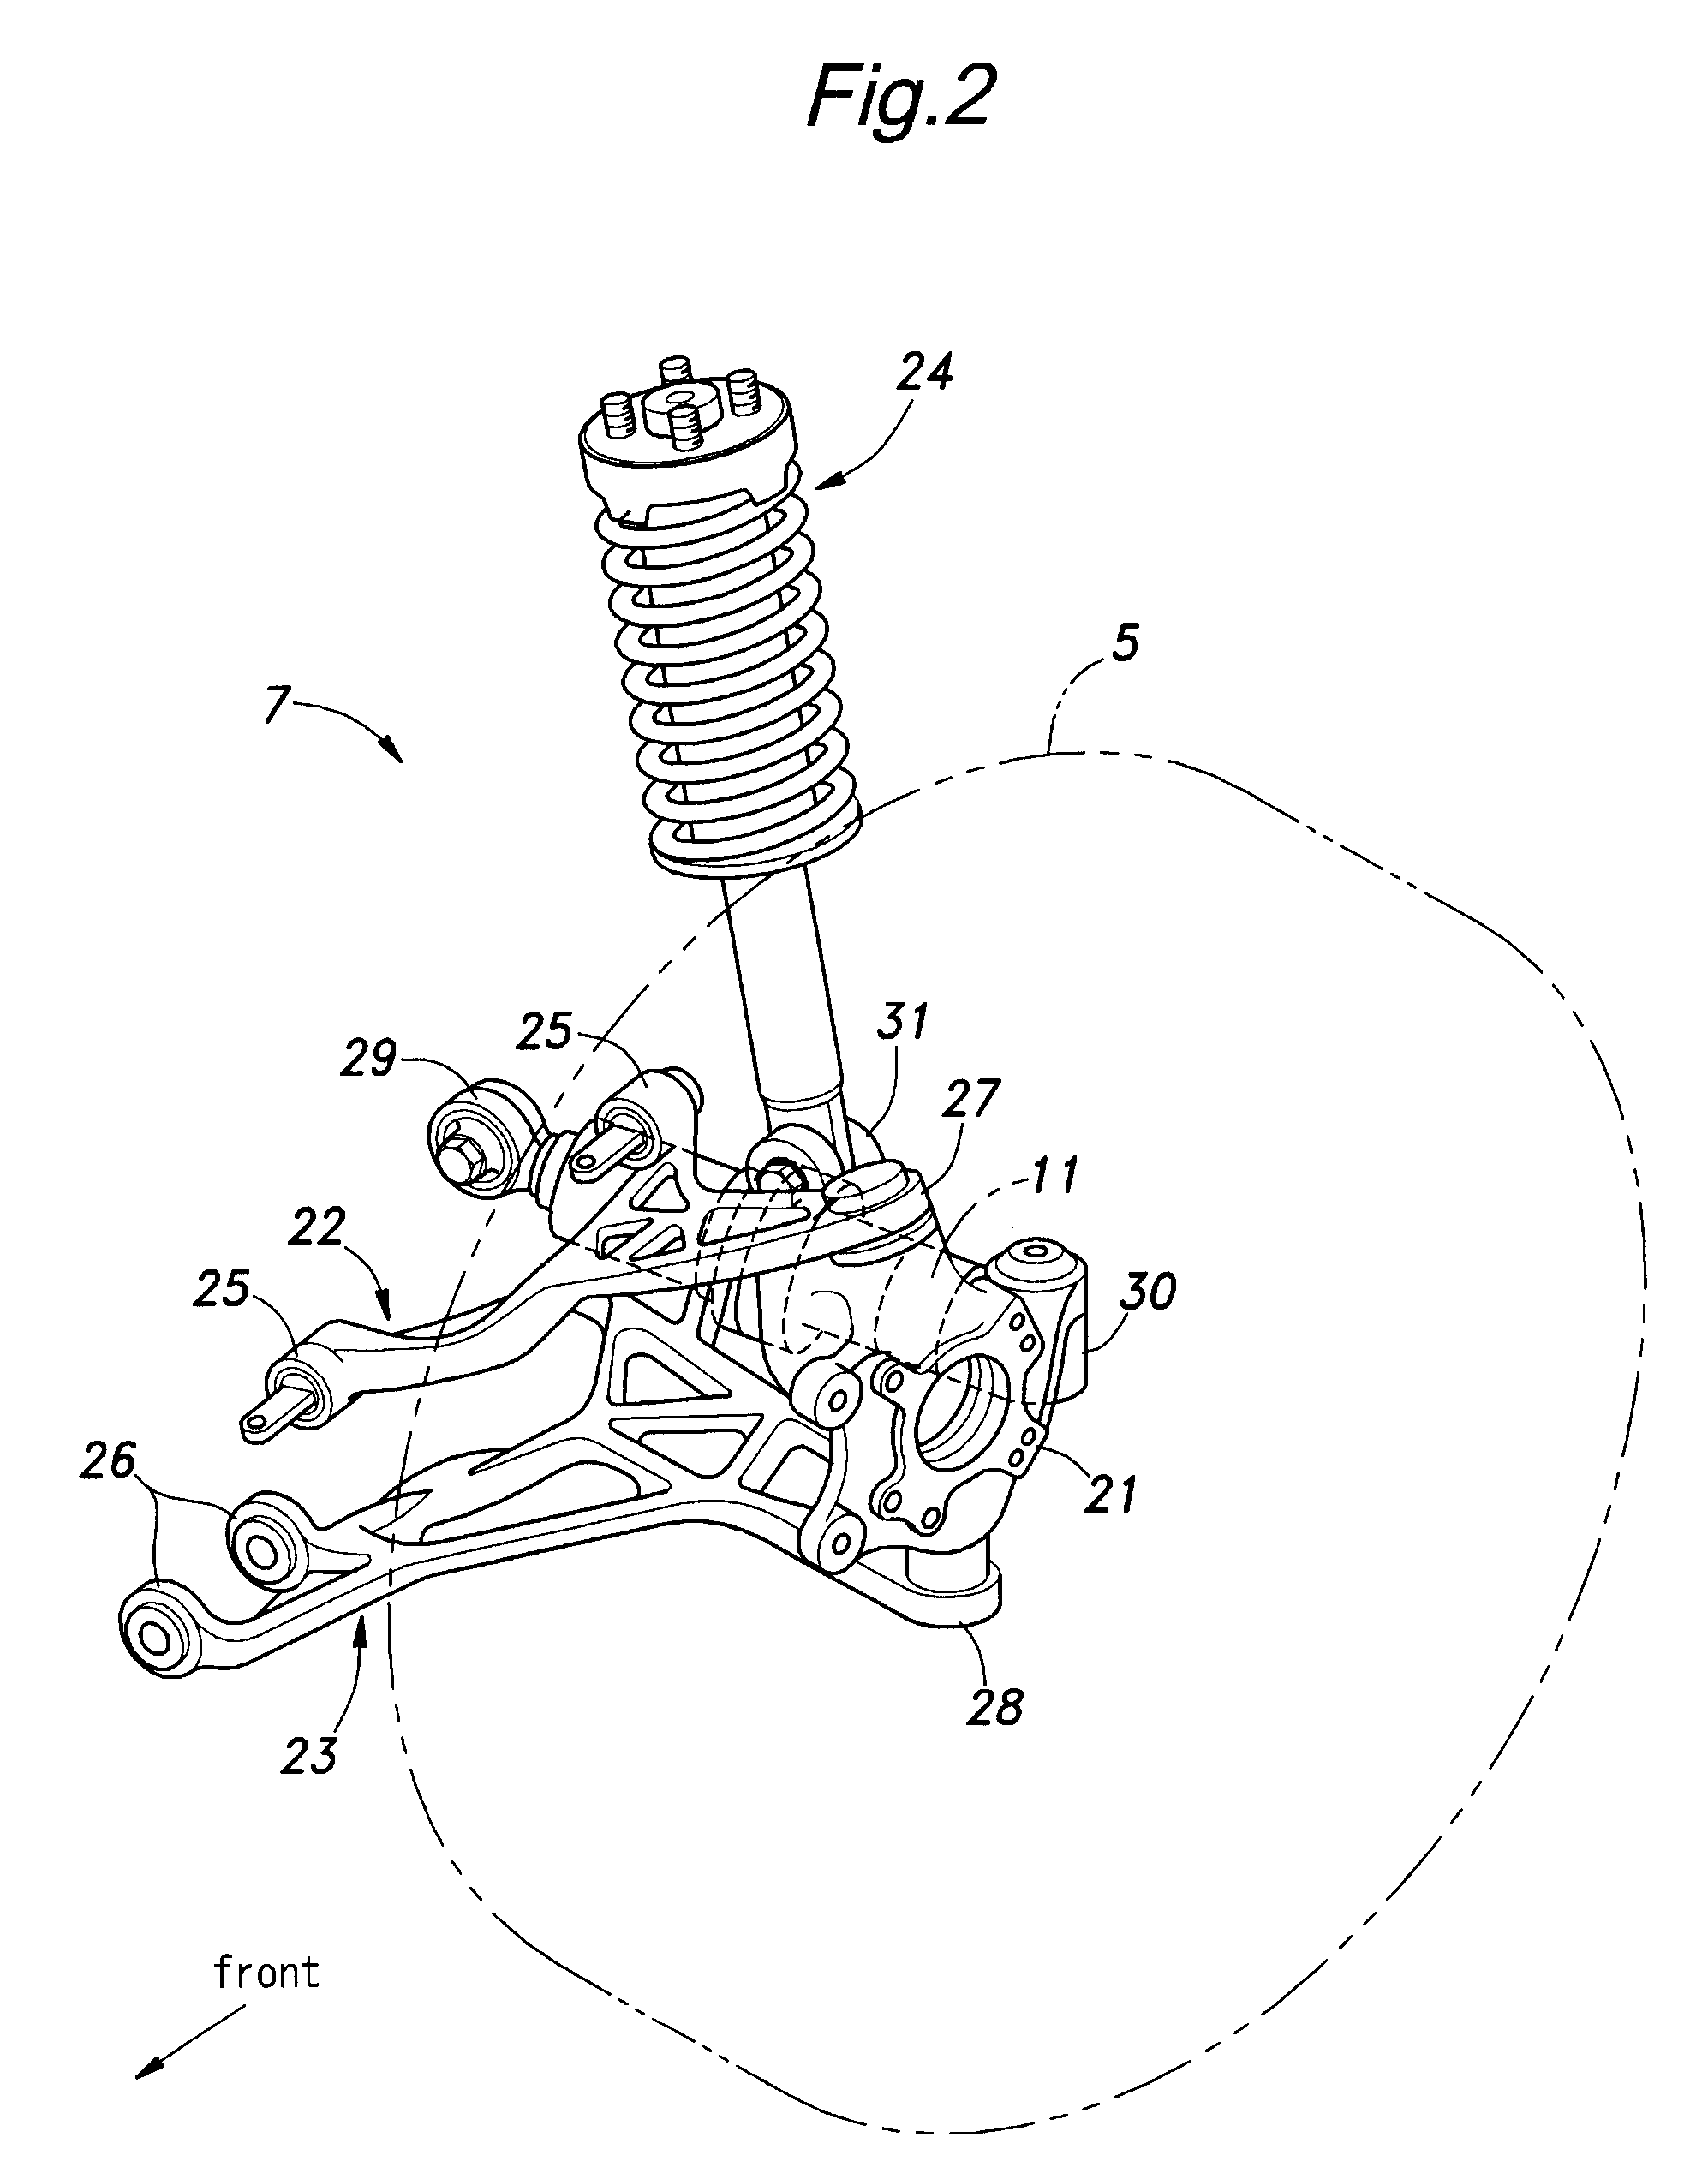 Vehicle with a variable rear toe angle